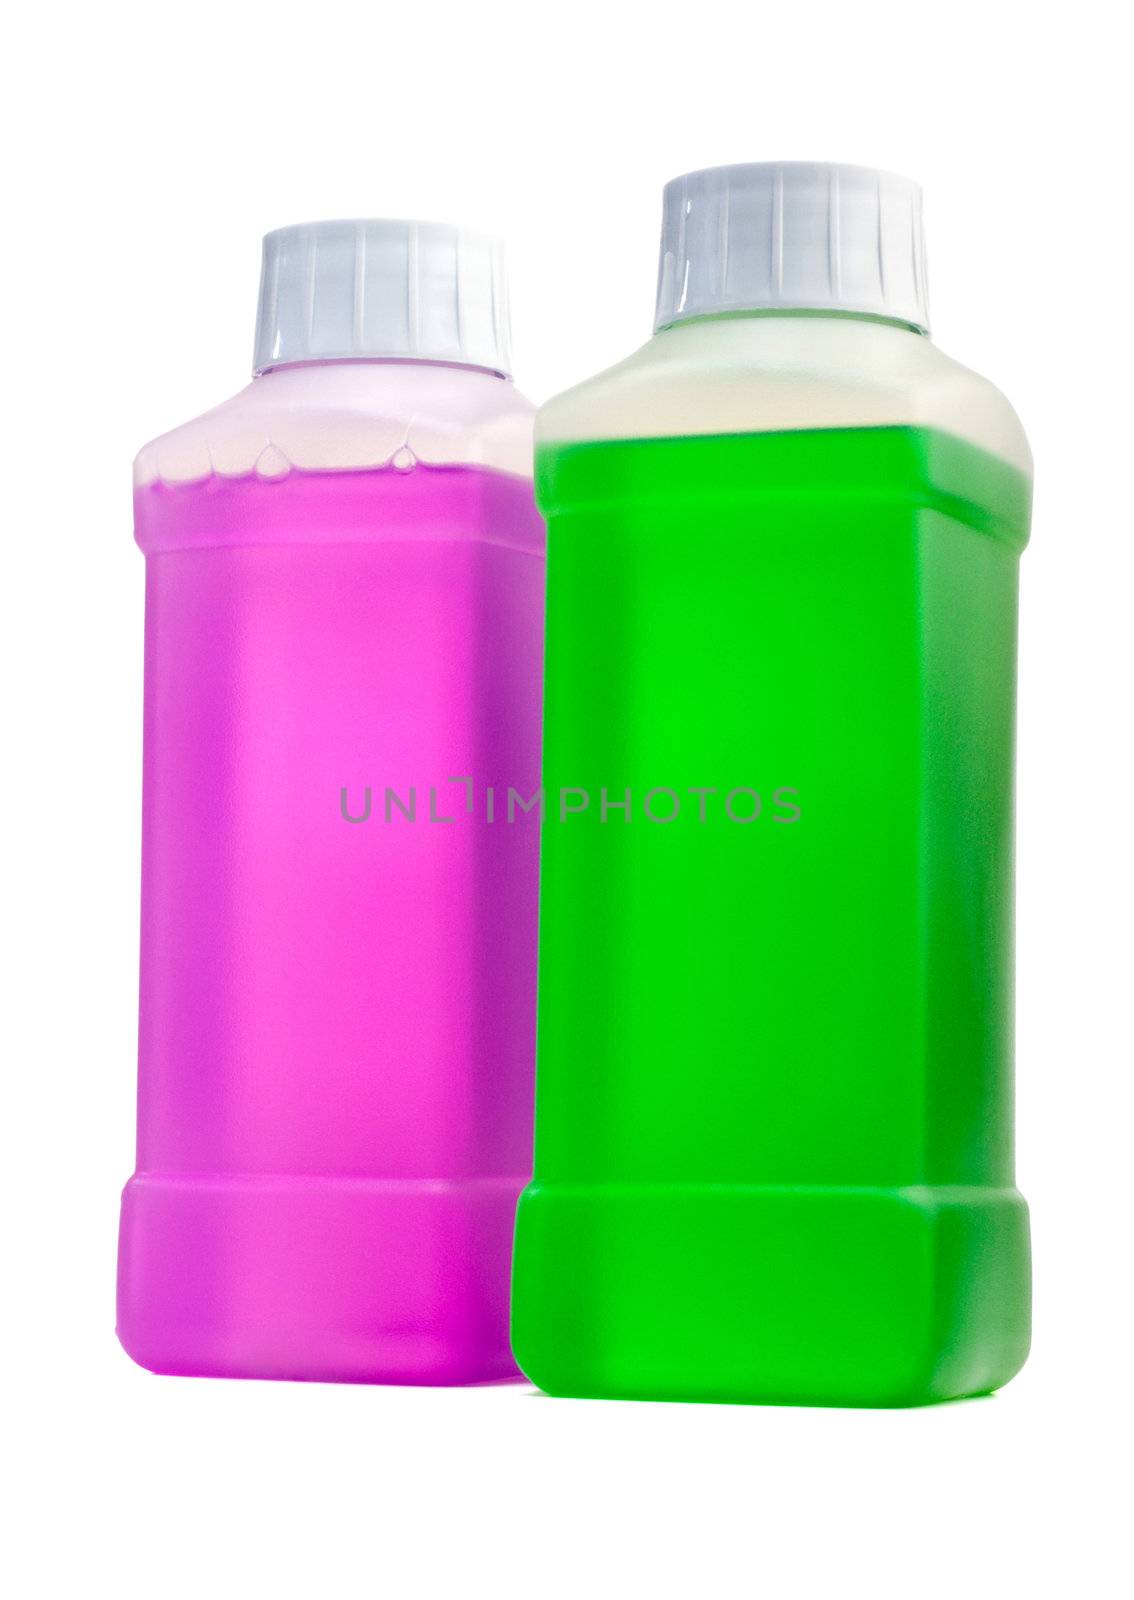 Two transparent plastic bottles with color cleaning liquid. Standing one by one.